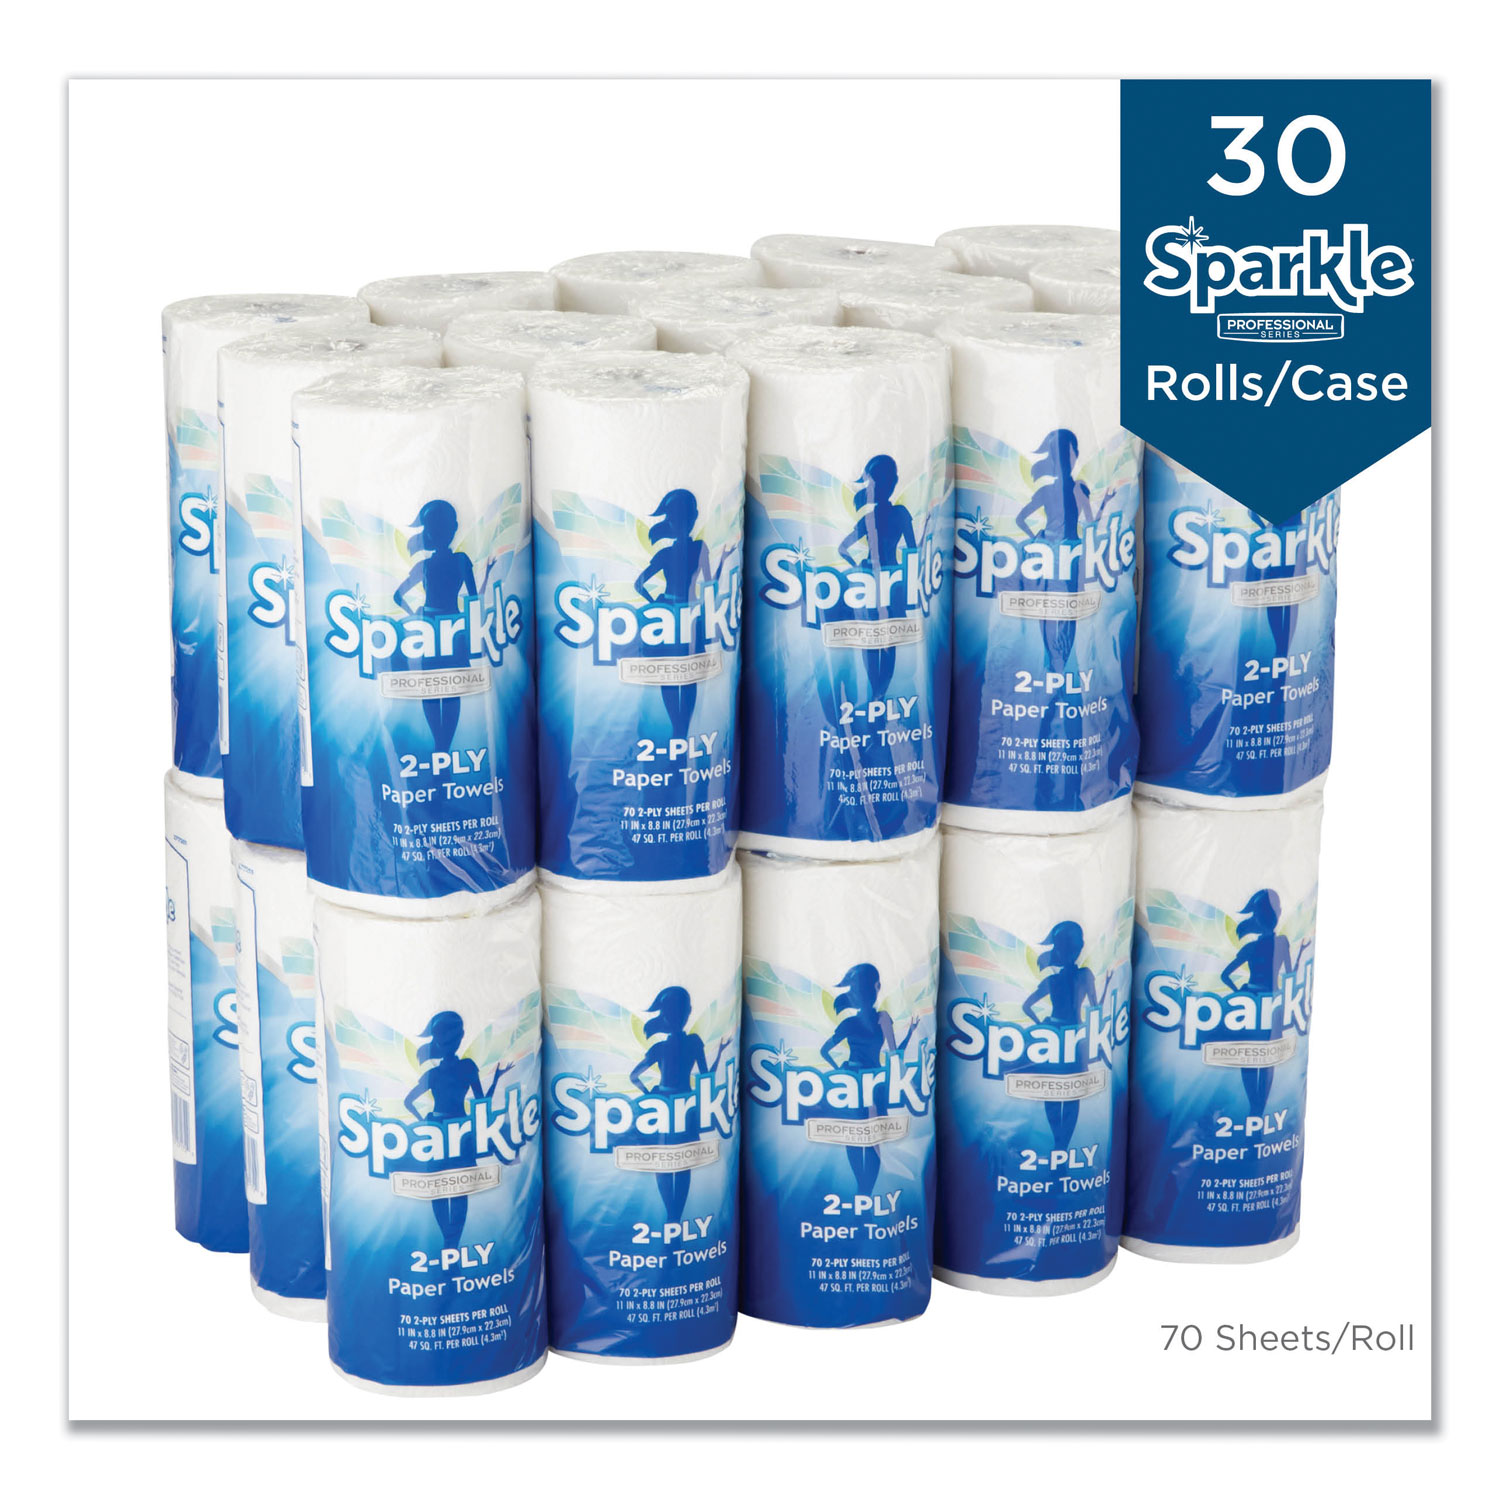 70 Sheets/Roll Sparkle 2717201 Sparkle Premium Roll Towels 30 Rolls 